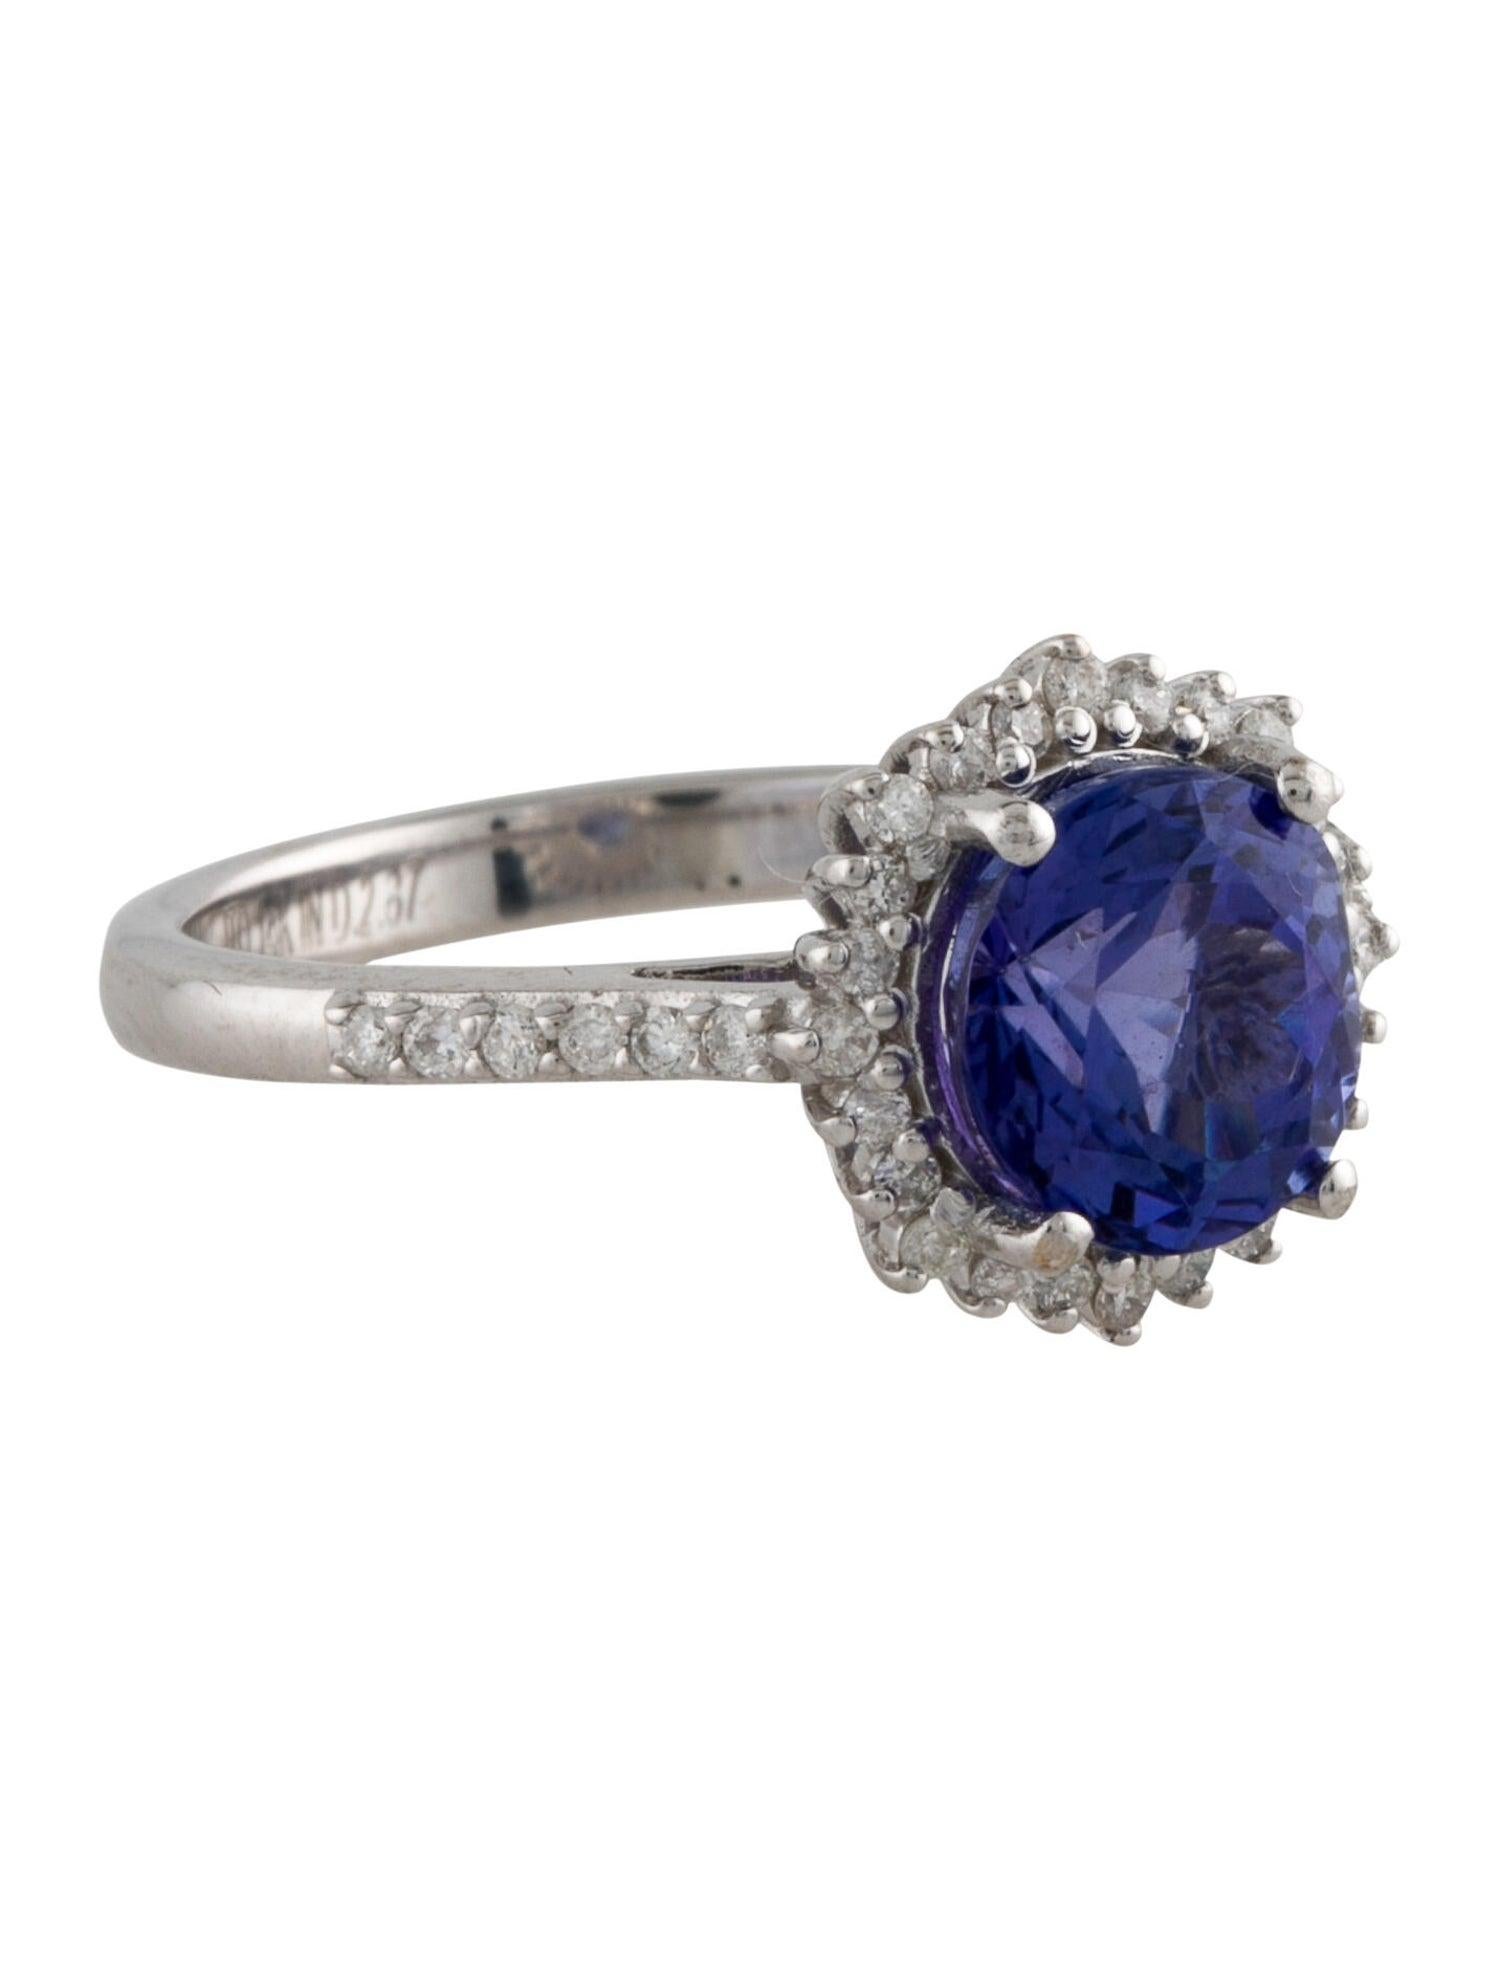 Embrace the allure of sophistication with our 14K White Gold Tanzanite and Diamond Cocktail Ring, designed for those who appreciate the beauty of fine jewelry. This stunning piece features a central 2.25 carat round faceted Tanzanite, exuding a deep